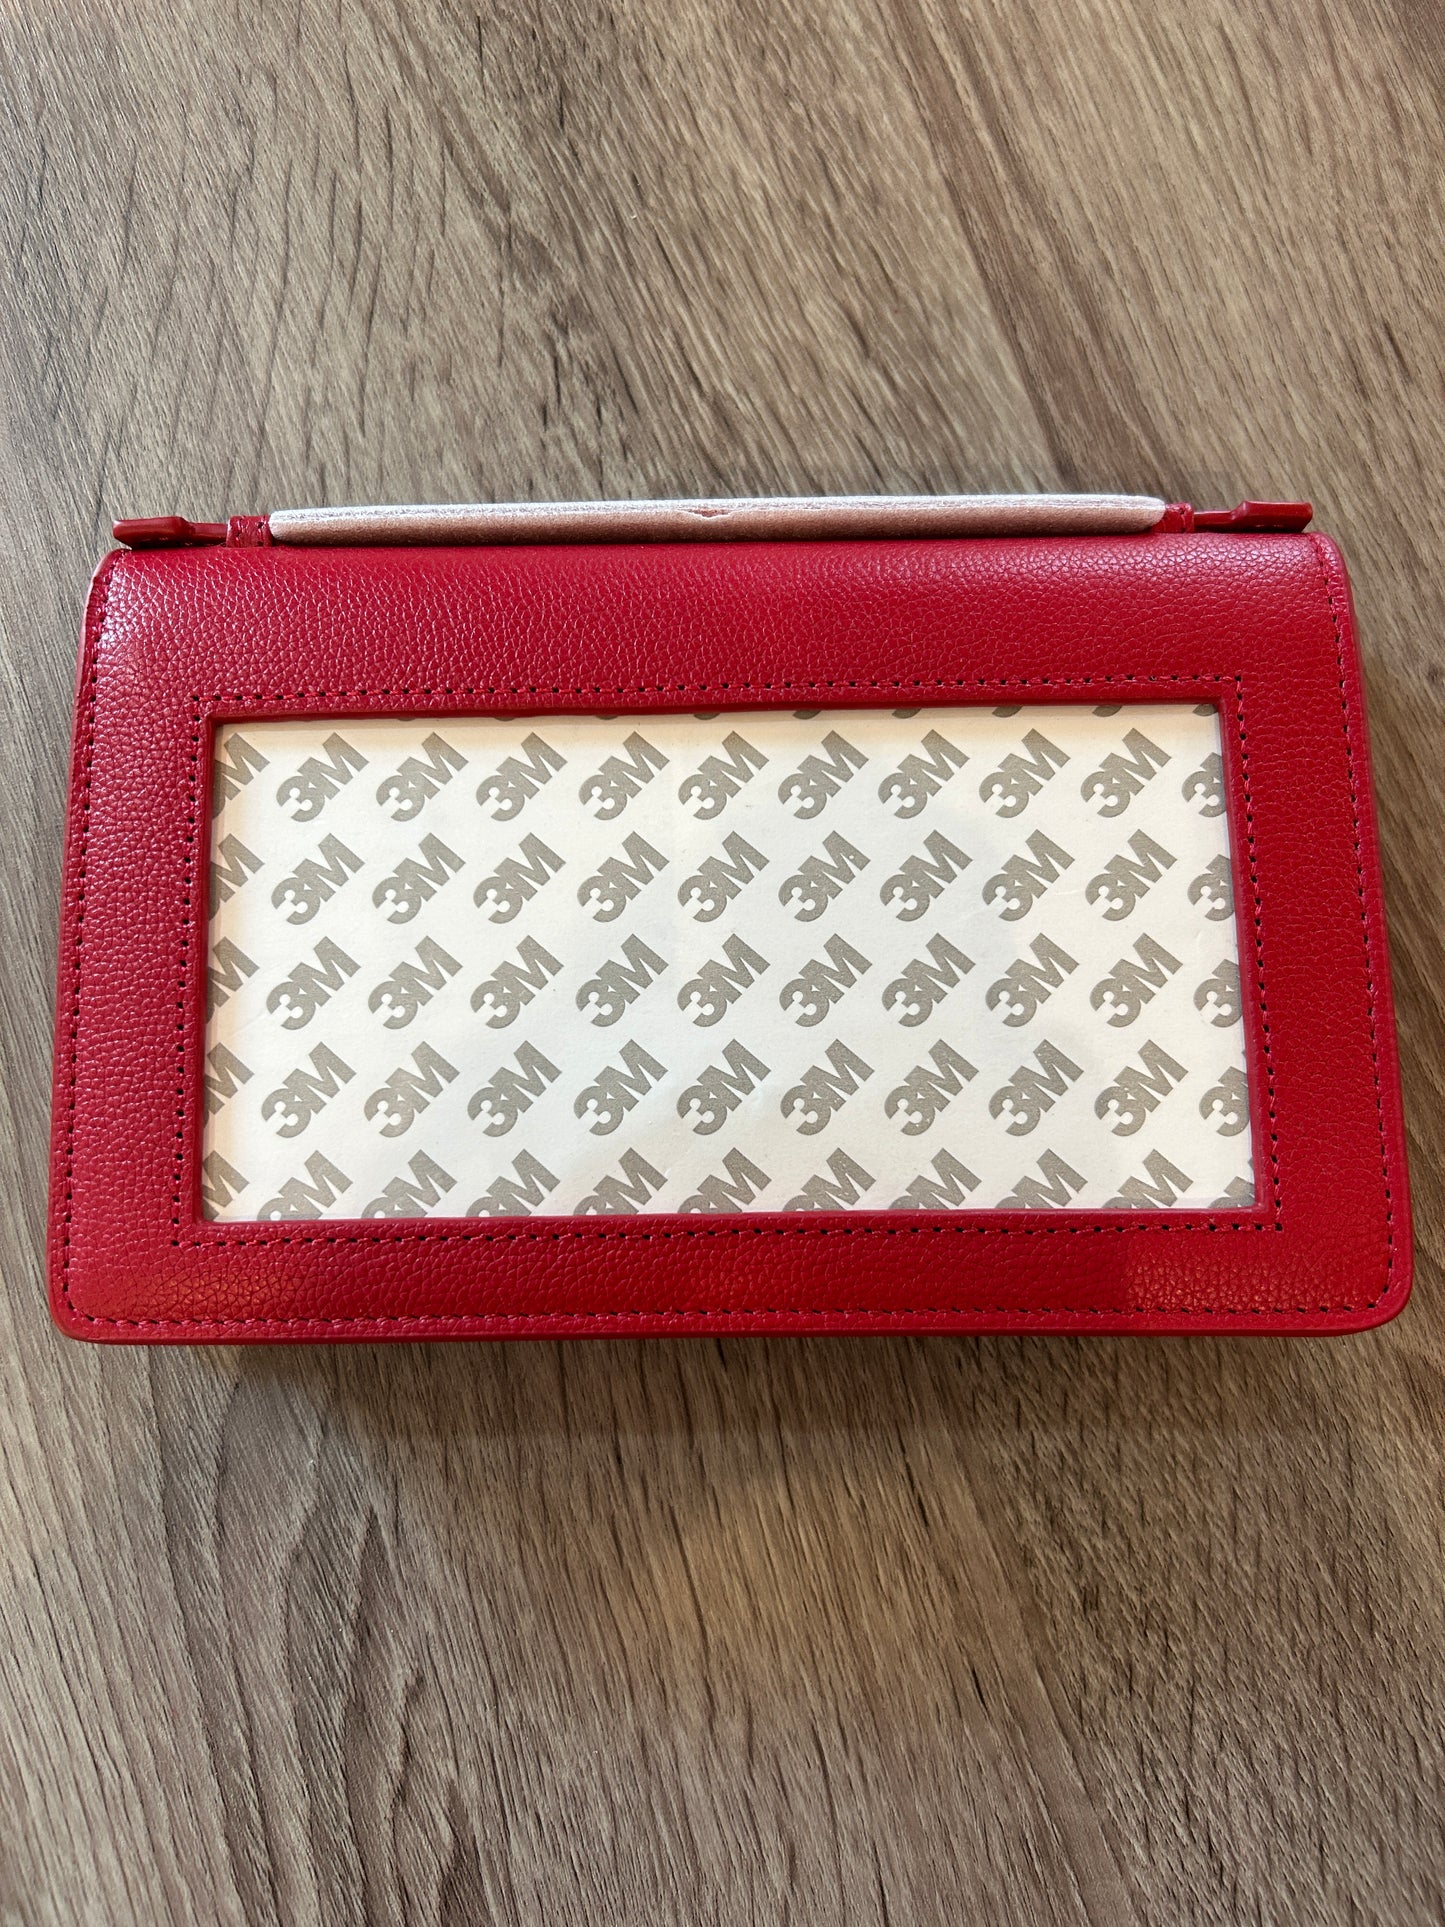 The Everyday Clutch - Red Leather